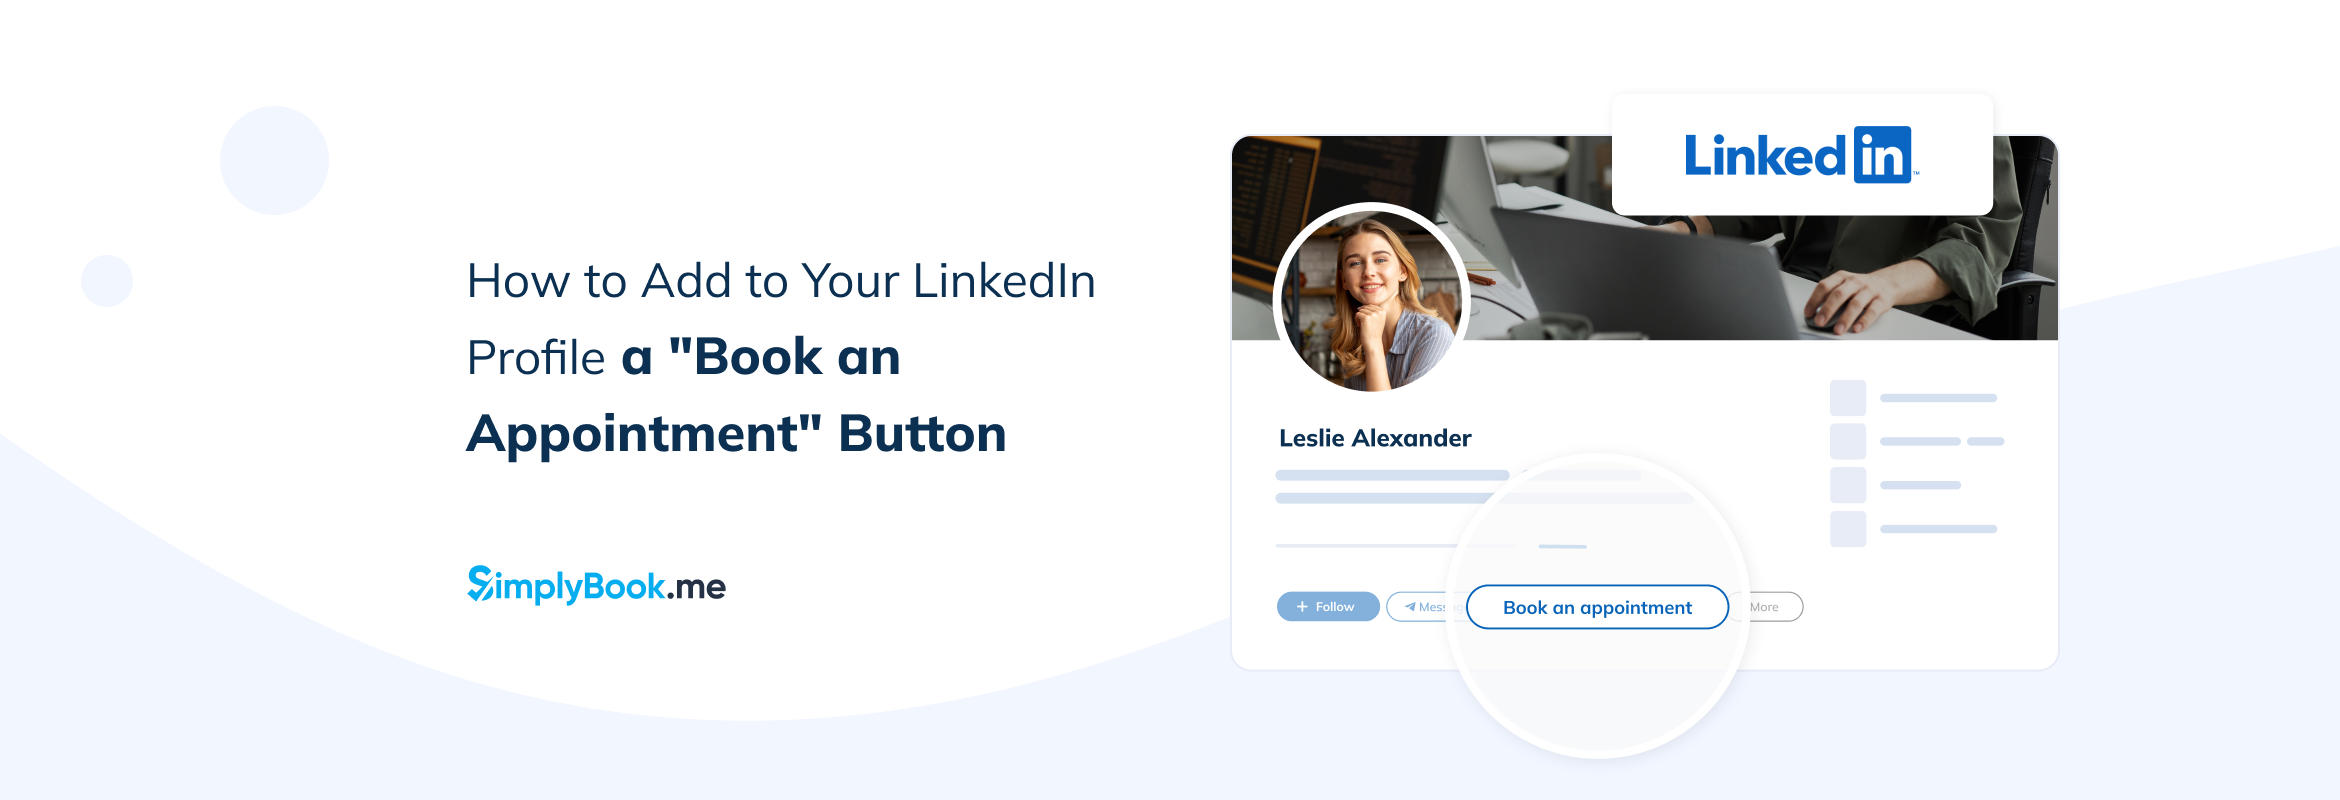 Add a Book Appointment Button to your LinkedIn